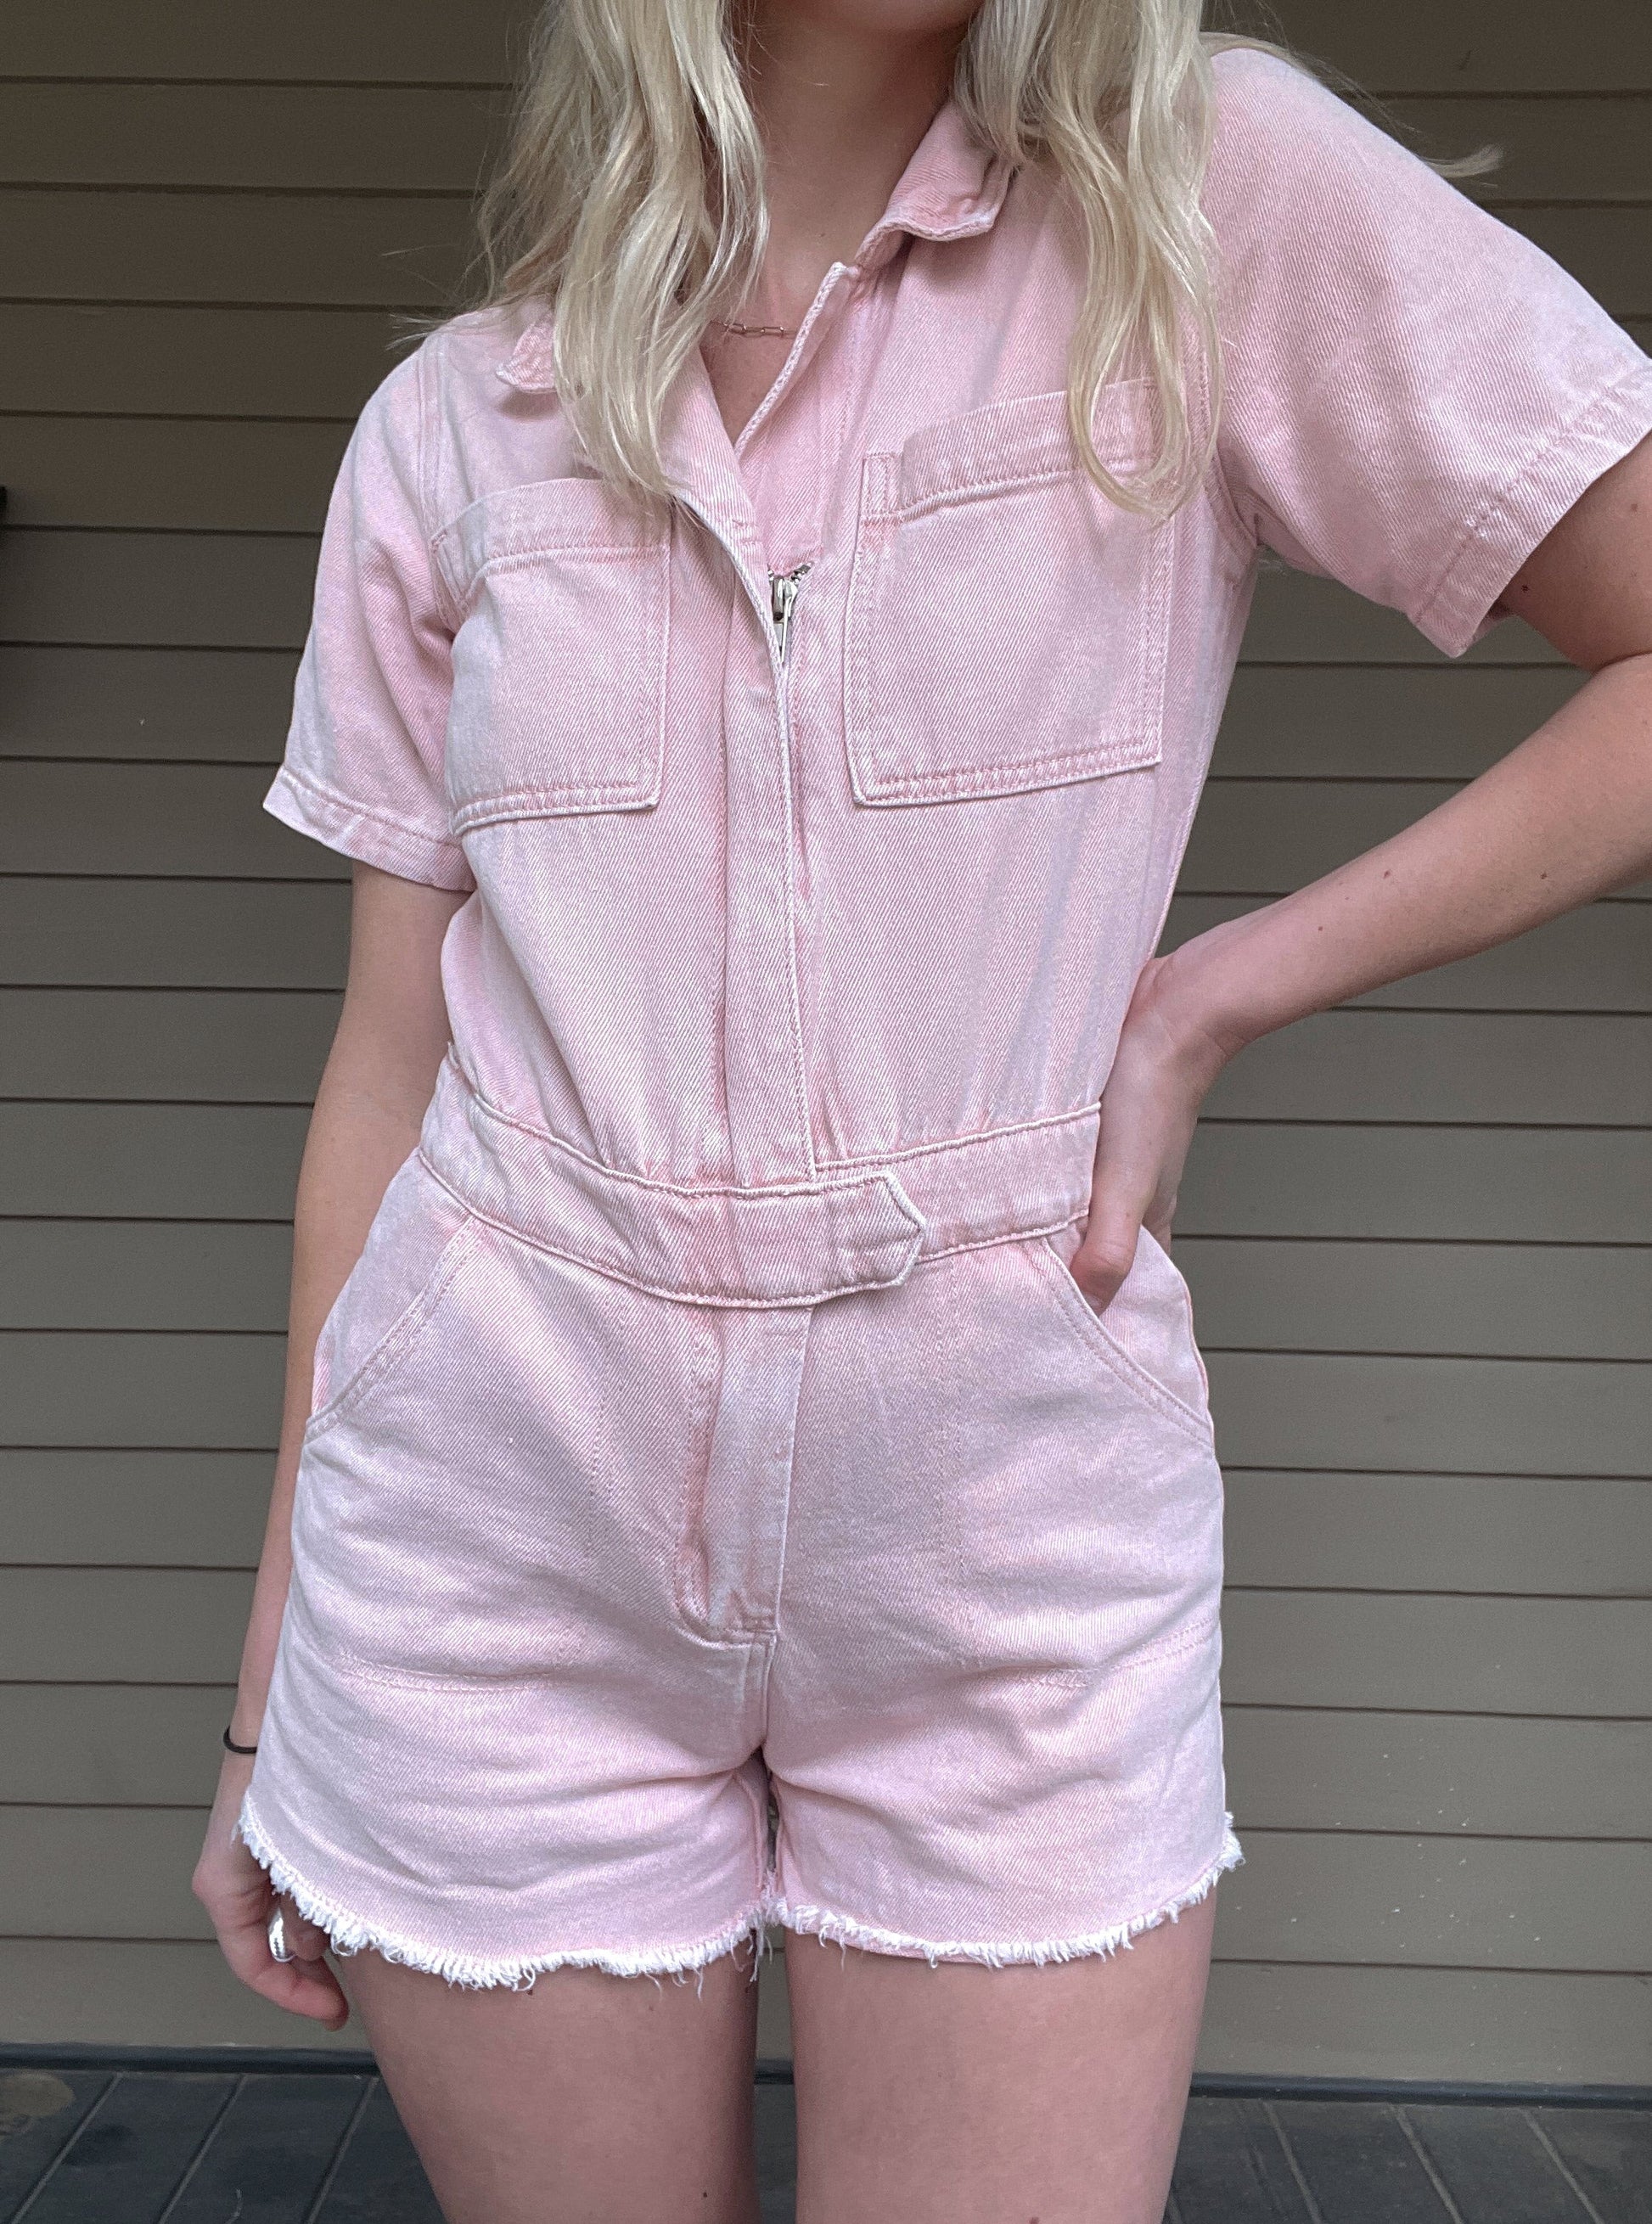 Adventure Denim Romper - Washed Pink  Denim Romper Zipper Pockets 100% Cotton Color: Washed Pink Ready for a wild adventure? The Adventurer Denim Romper is the perfect outfit for a daring escapade! The pink and button up design will keep you looking stylish, while the collar adds an air of sophistication - talk about an adventurers dream!